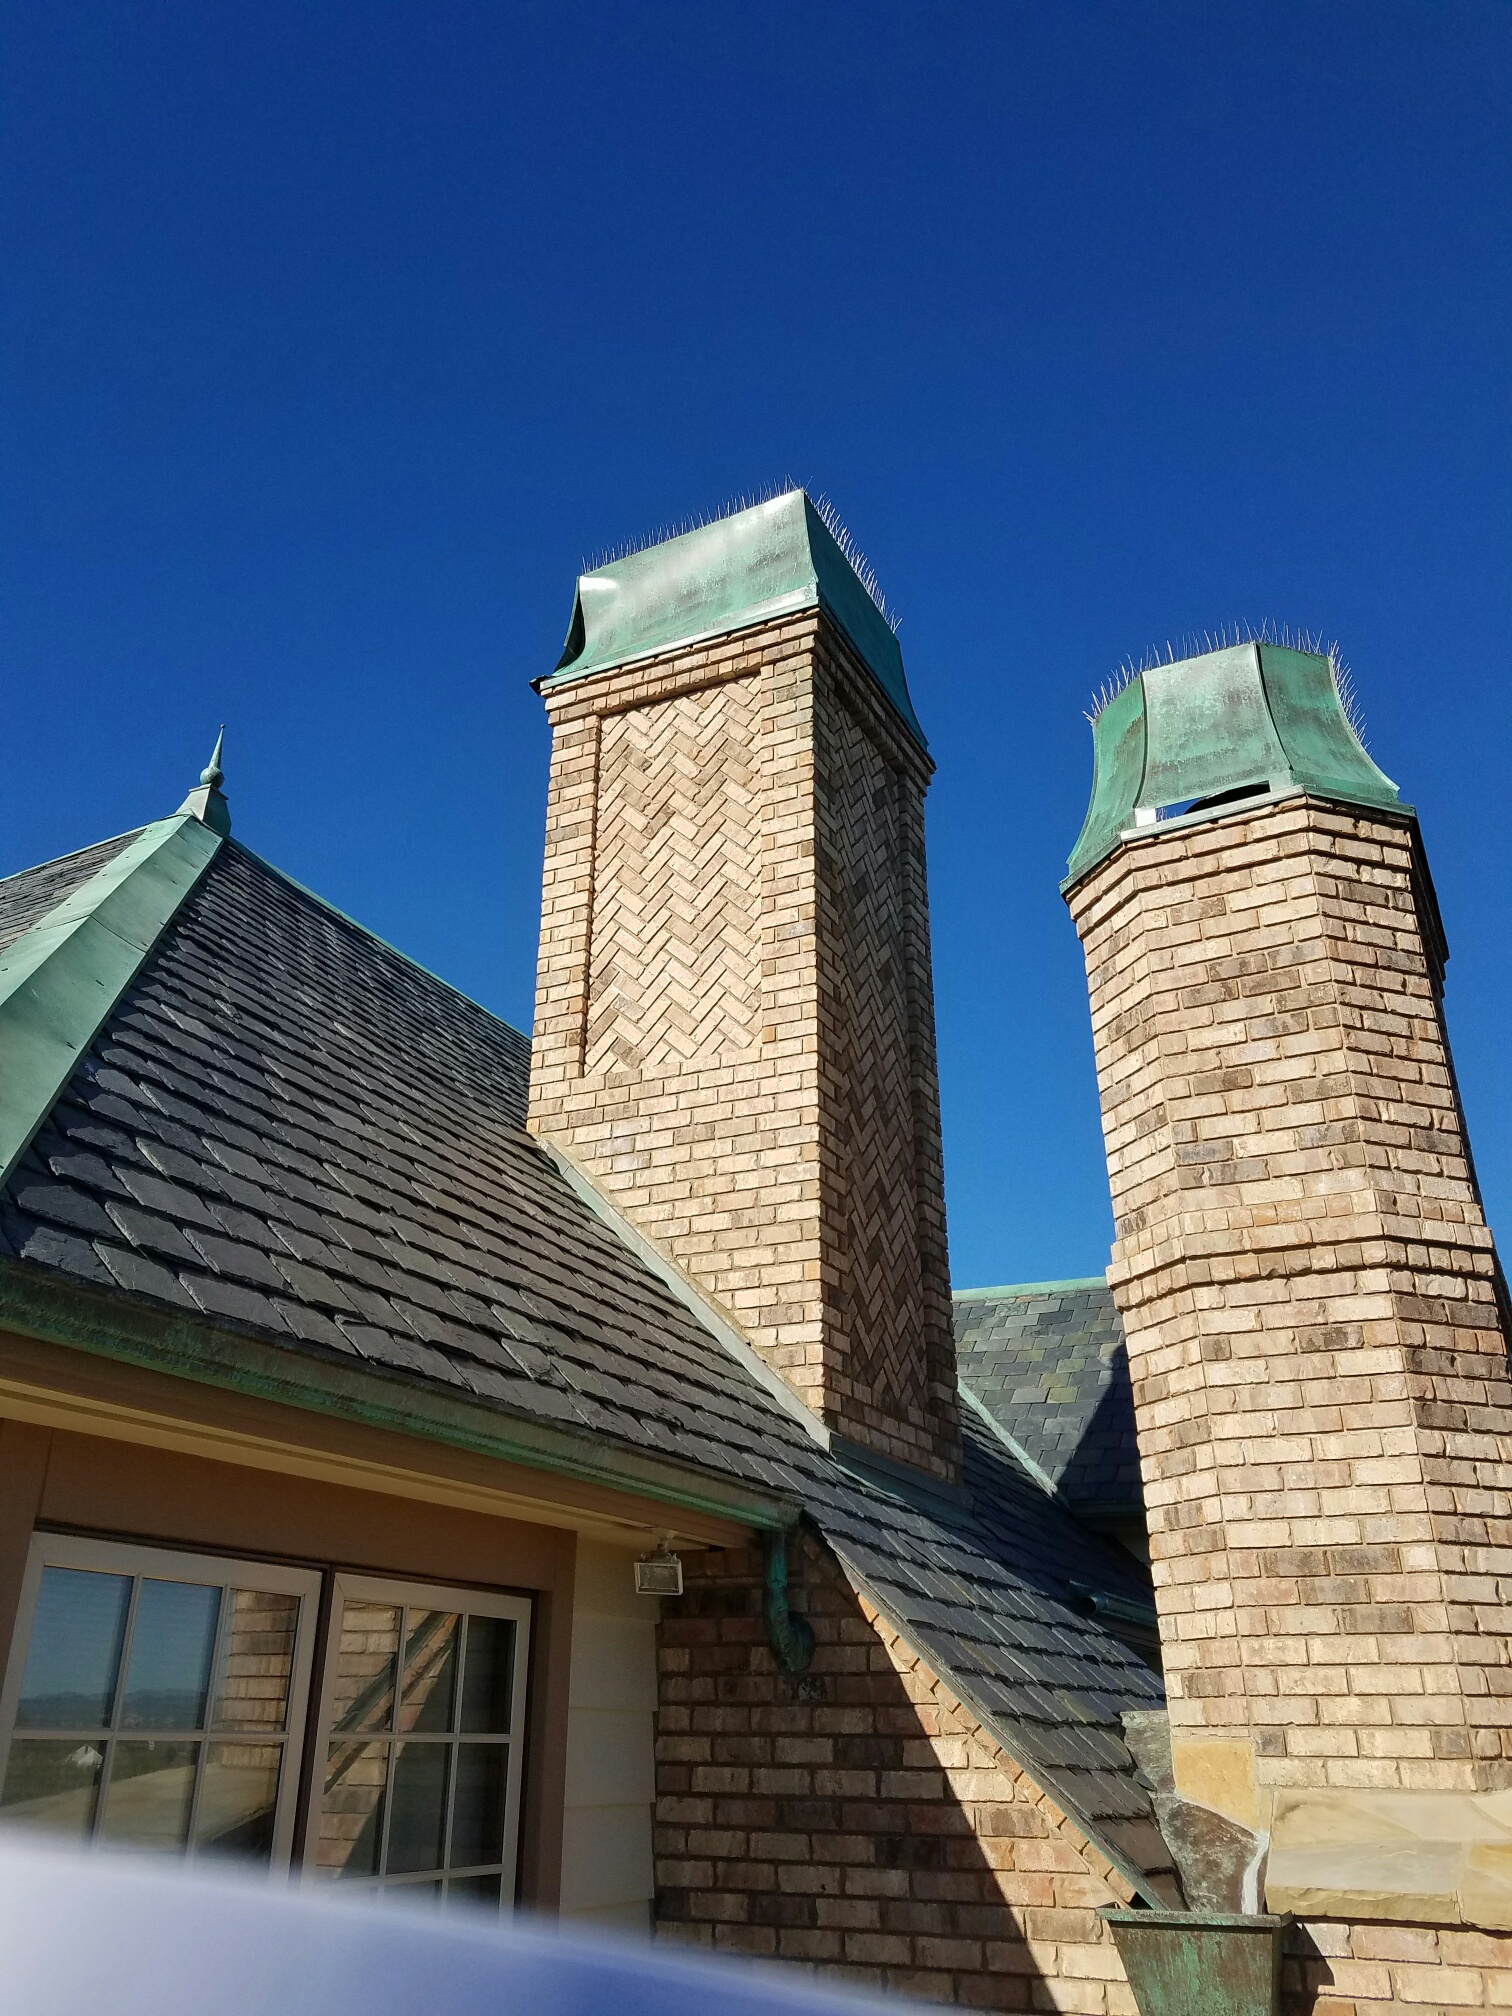 Copper Chimney and Copper Work